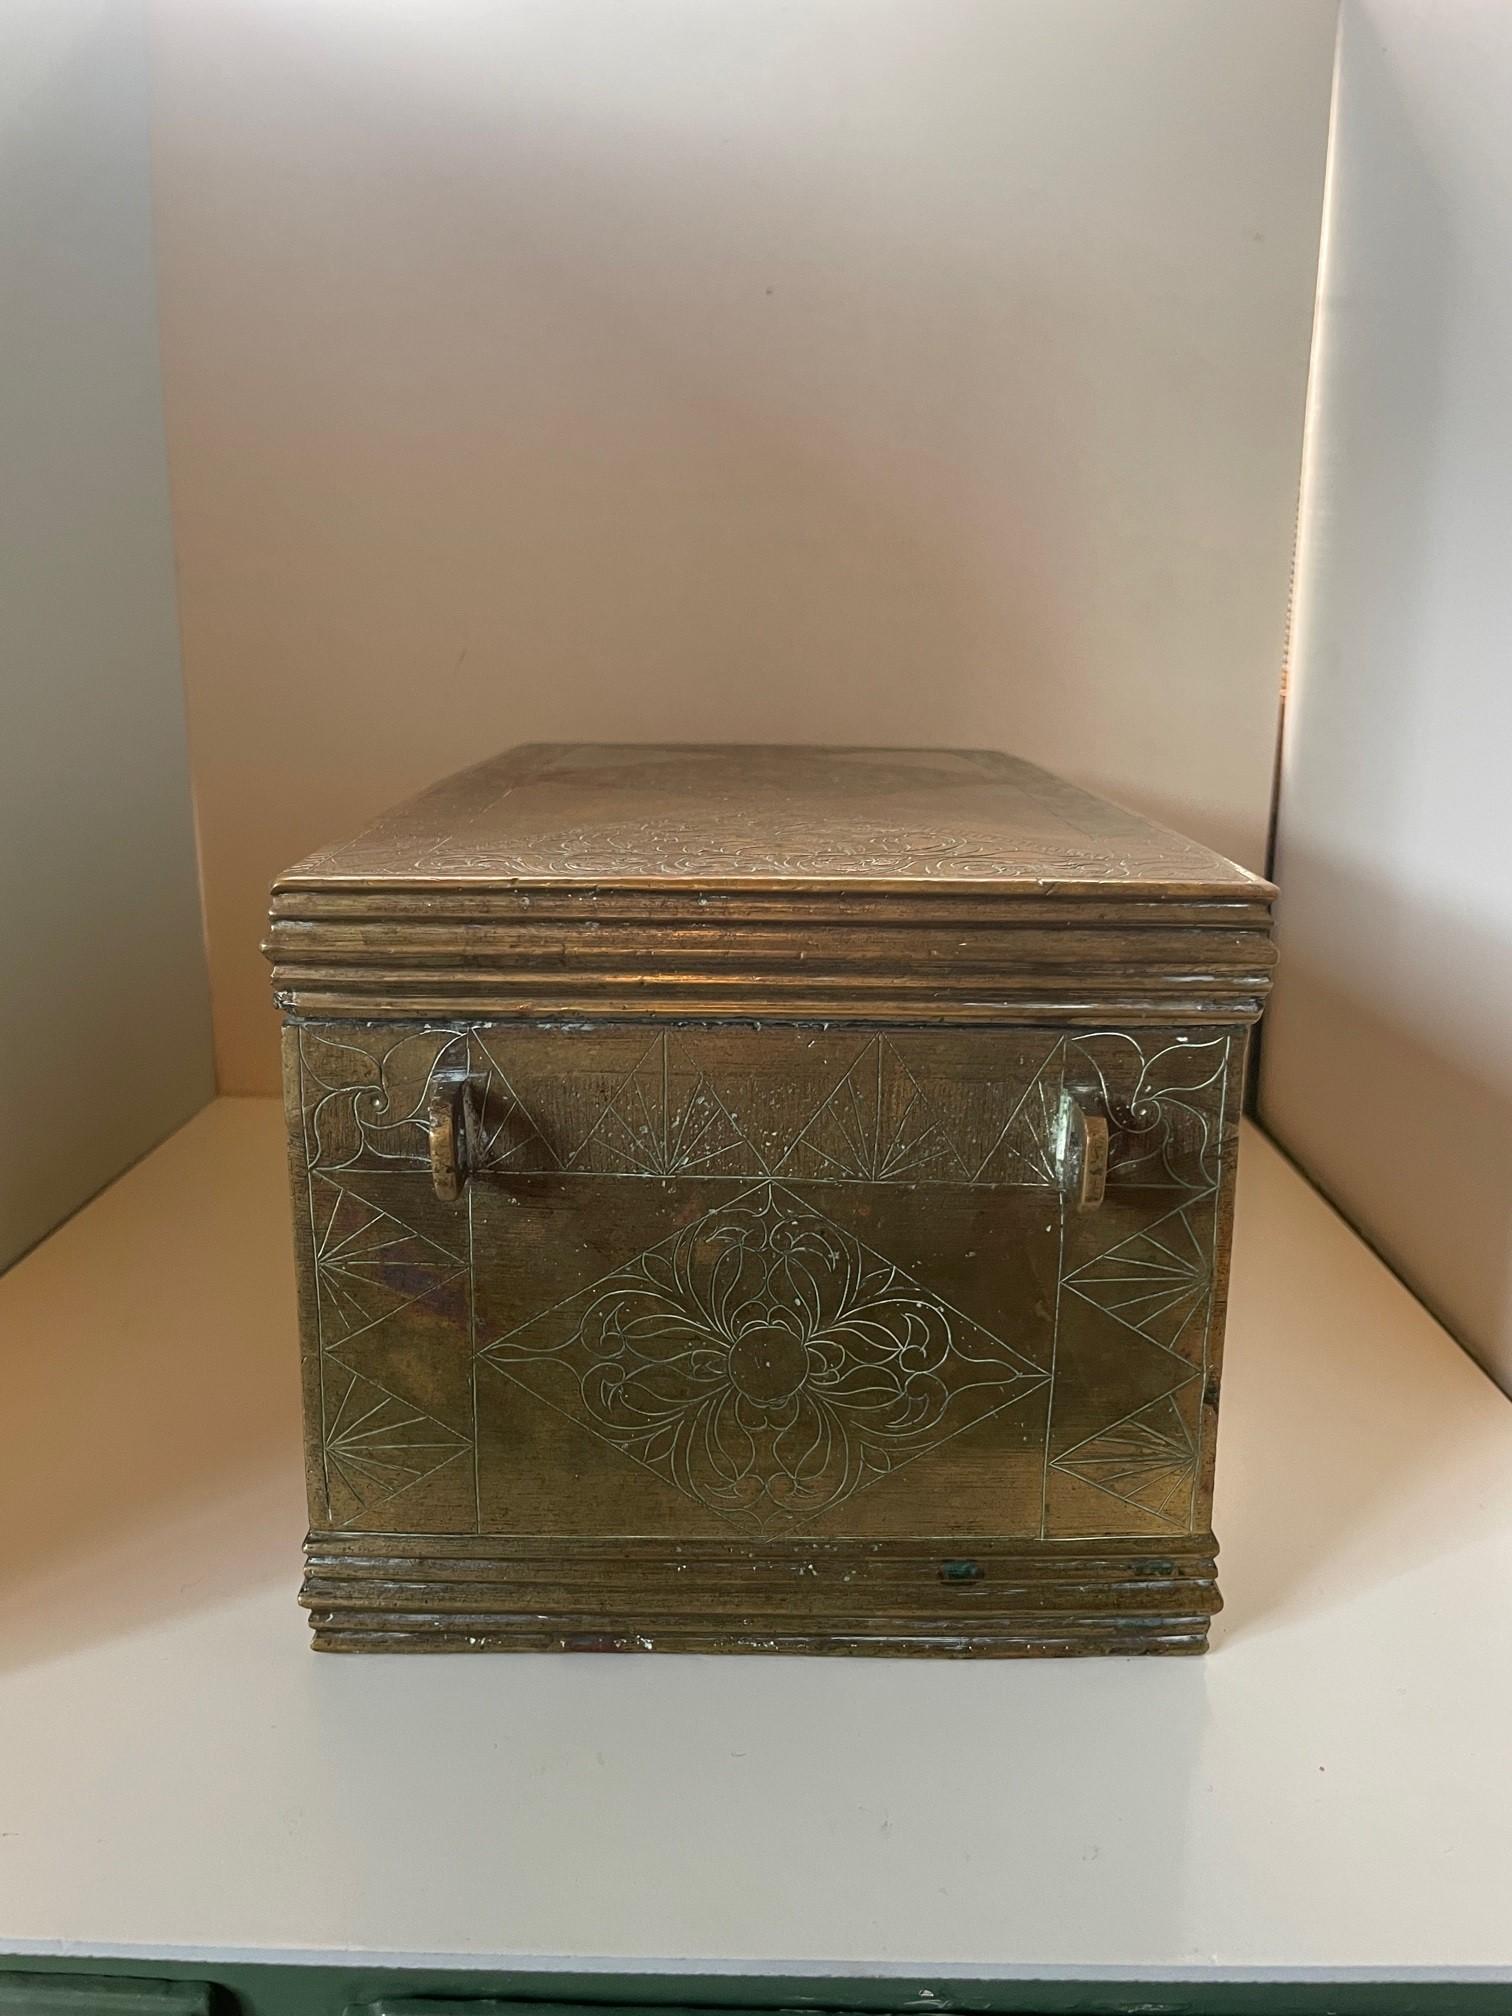 Antique solid brass lidded box from Qajar Iran, c. 20th century. Absolutely stunning piece with beautifully intricate engraving detail throughout. A diamond engraved pattern runs throughout that encloses floral engravings. Two handles on both sides